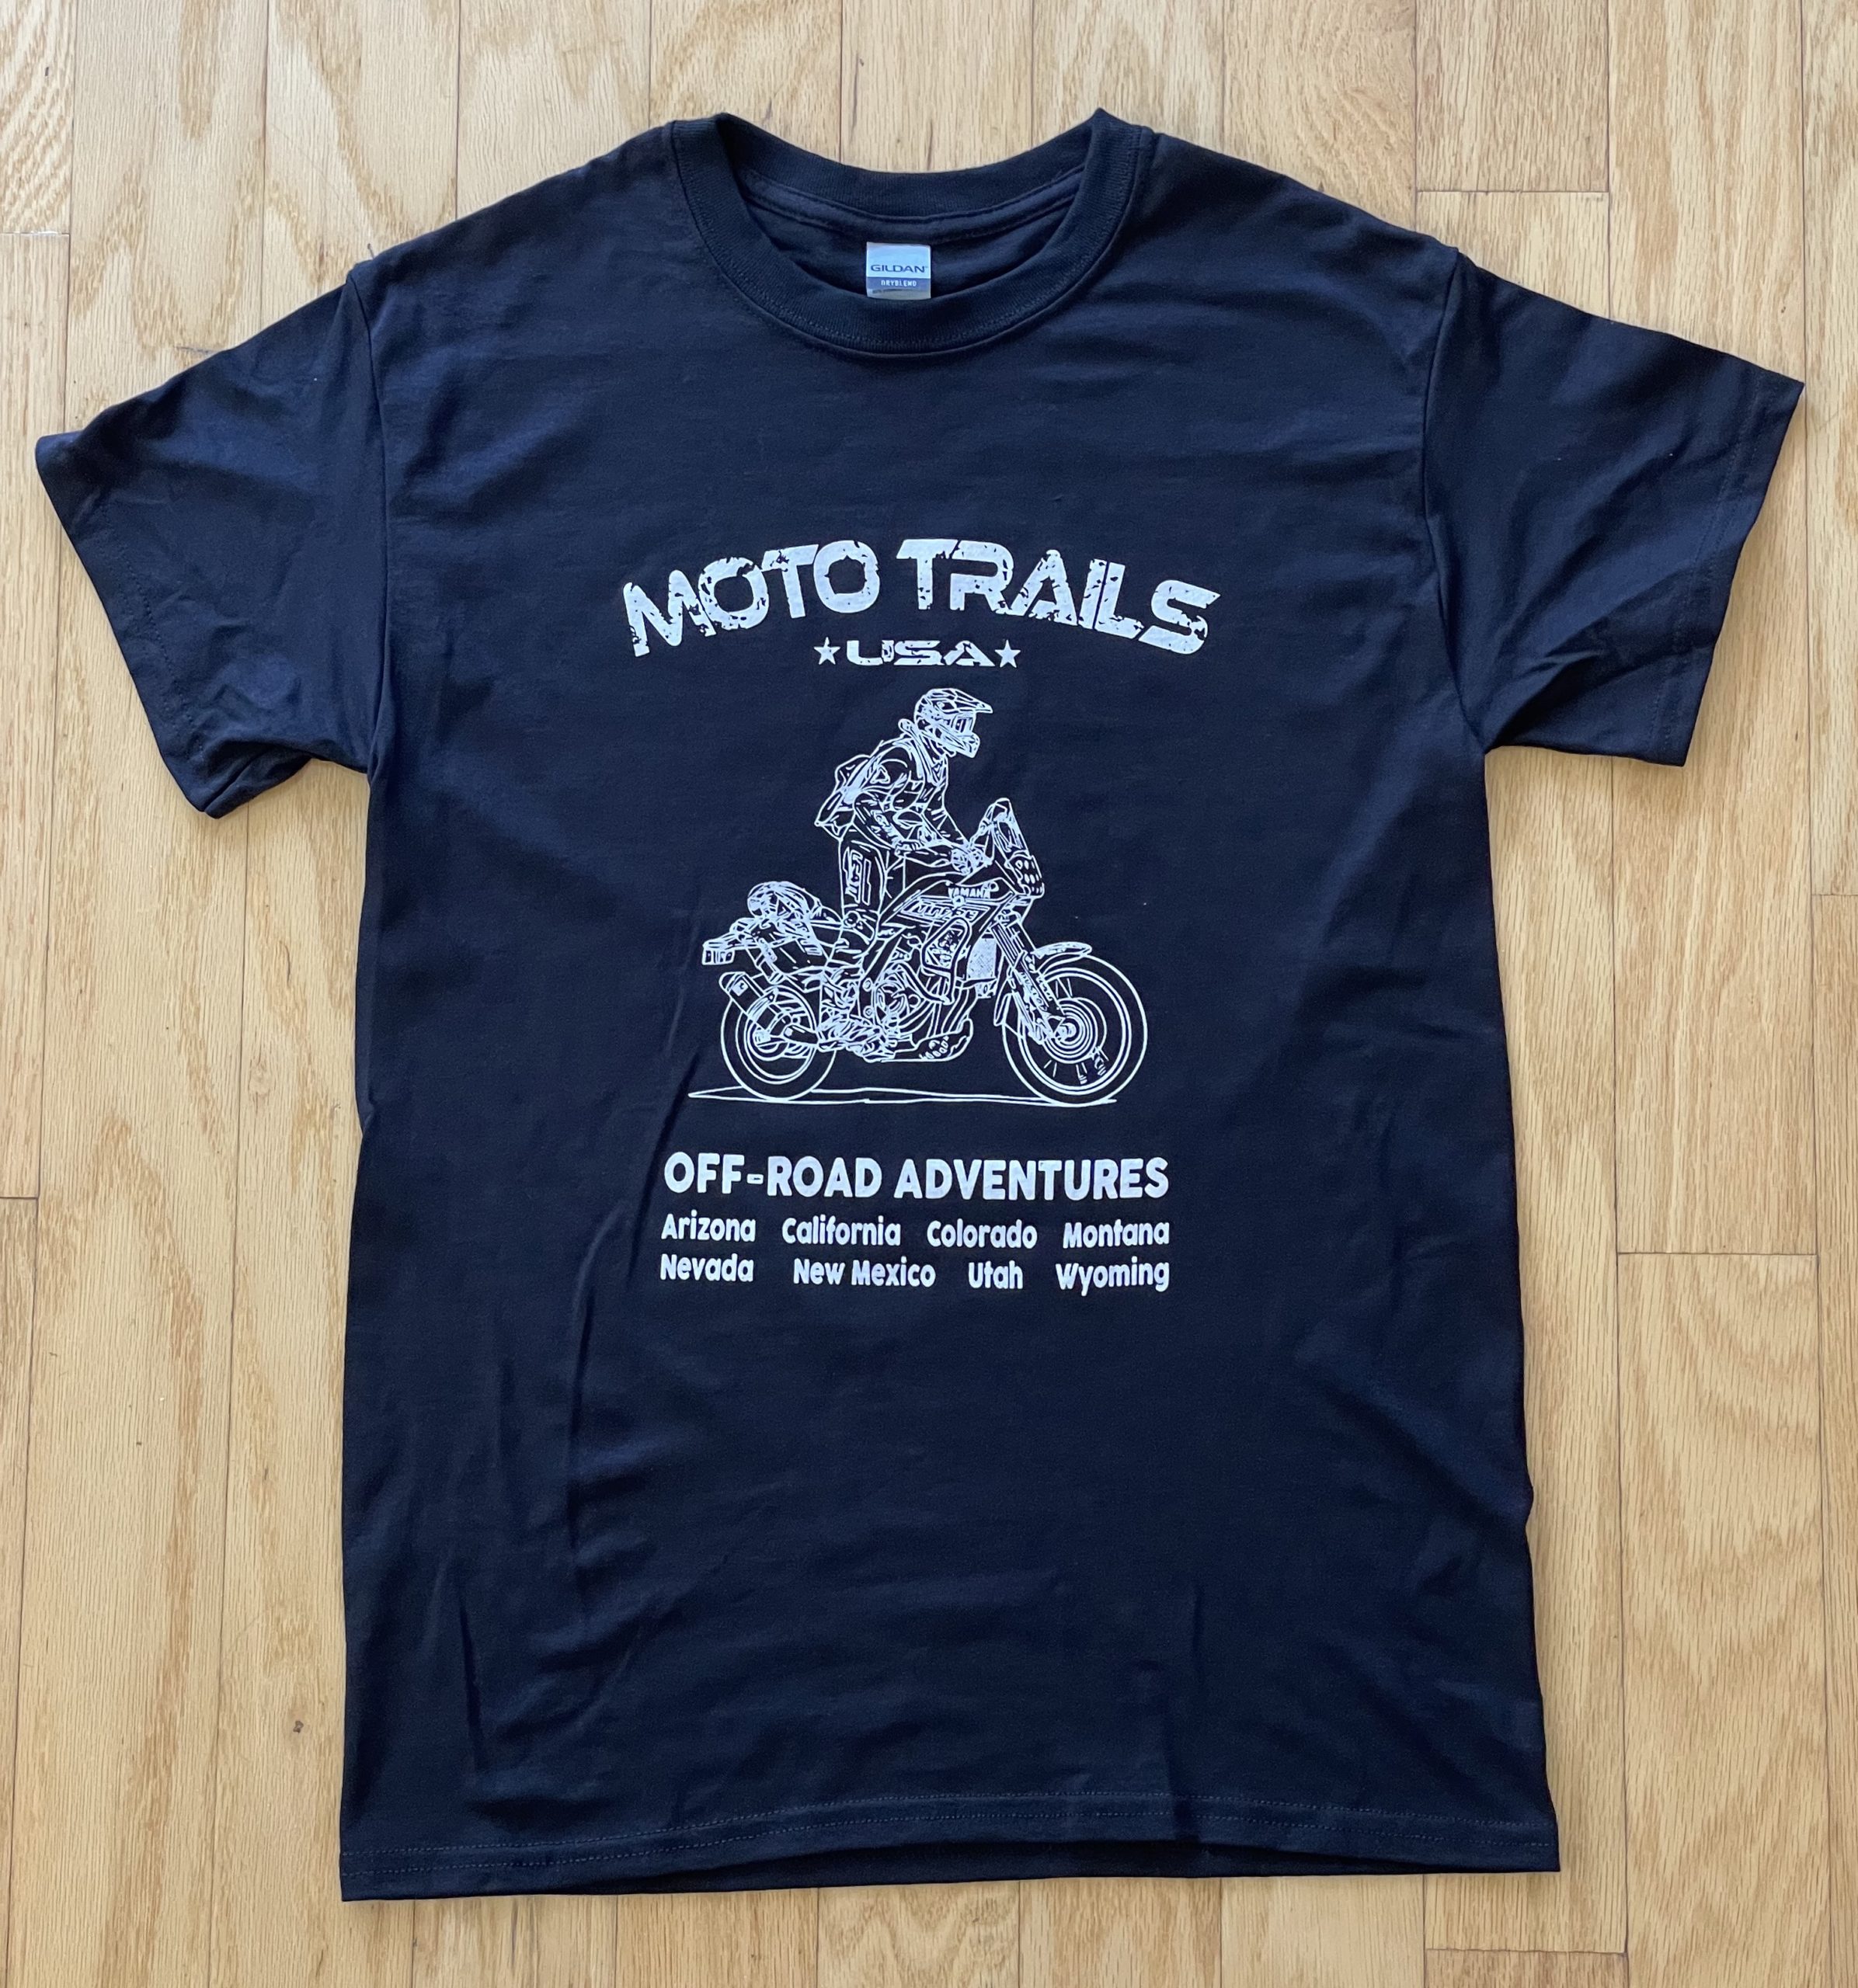 Black T-shirt Moto Trails USA Tenere 700  Moto Trails USA motorcycle tours  in the USA - Yamaha Tenere 700 - Continental Divide